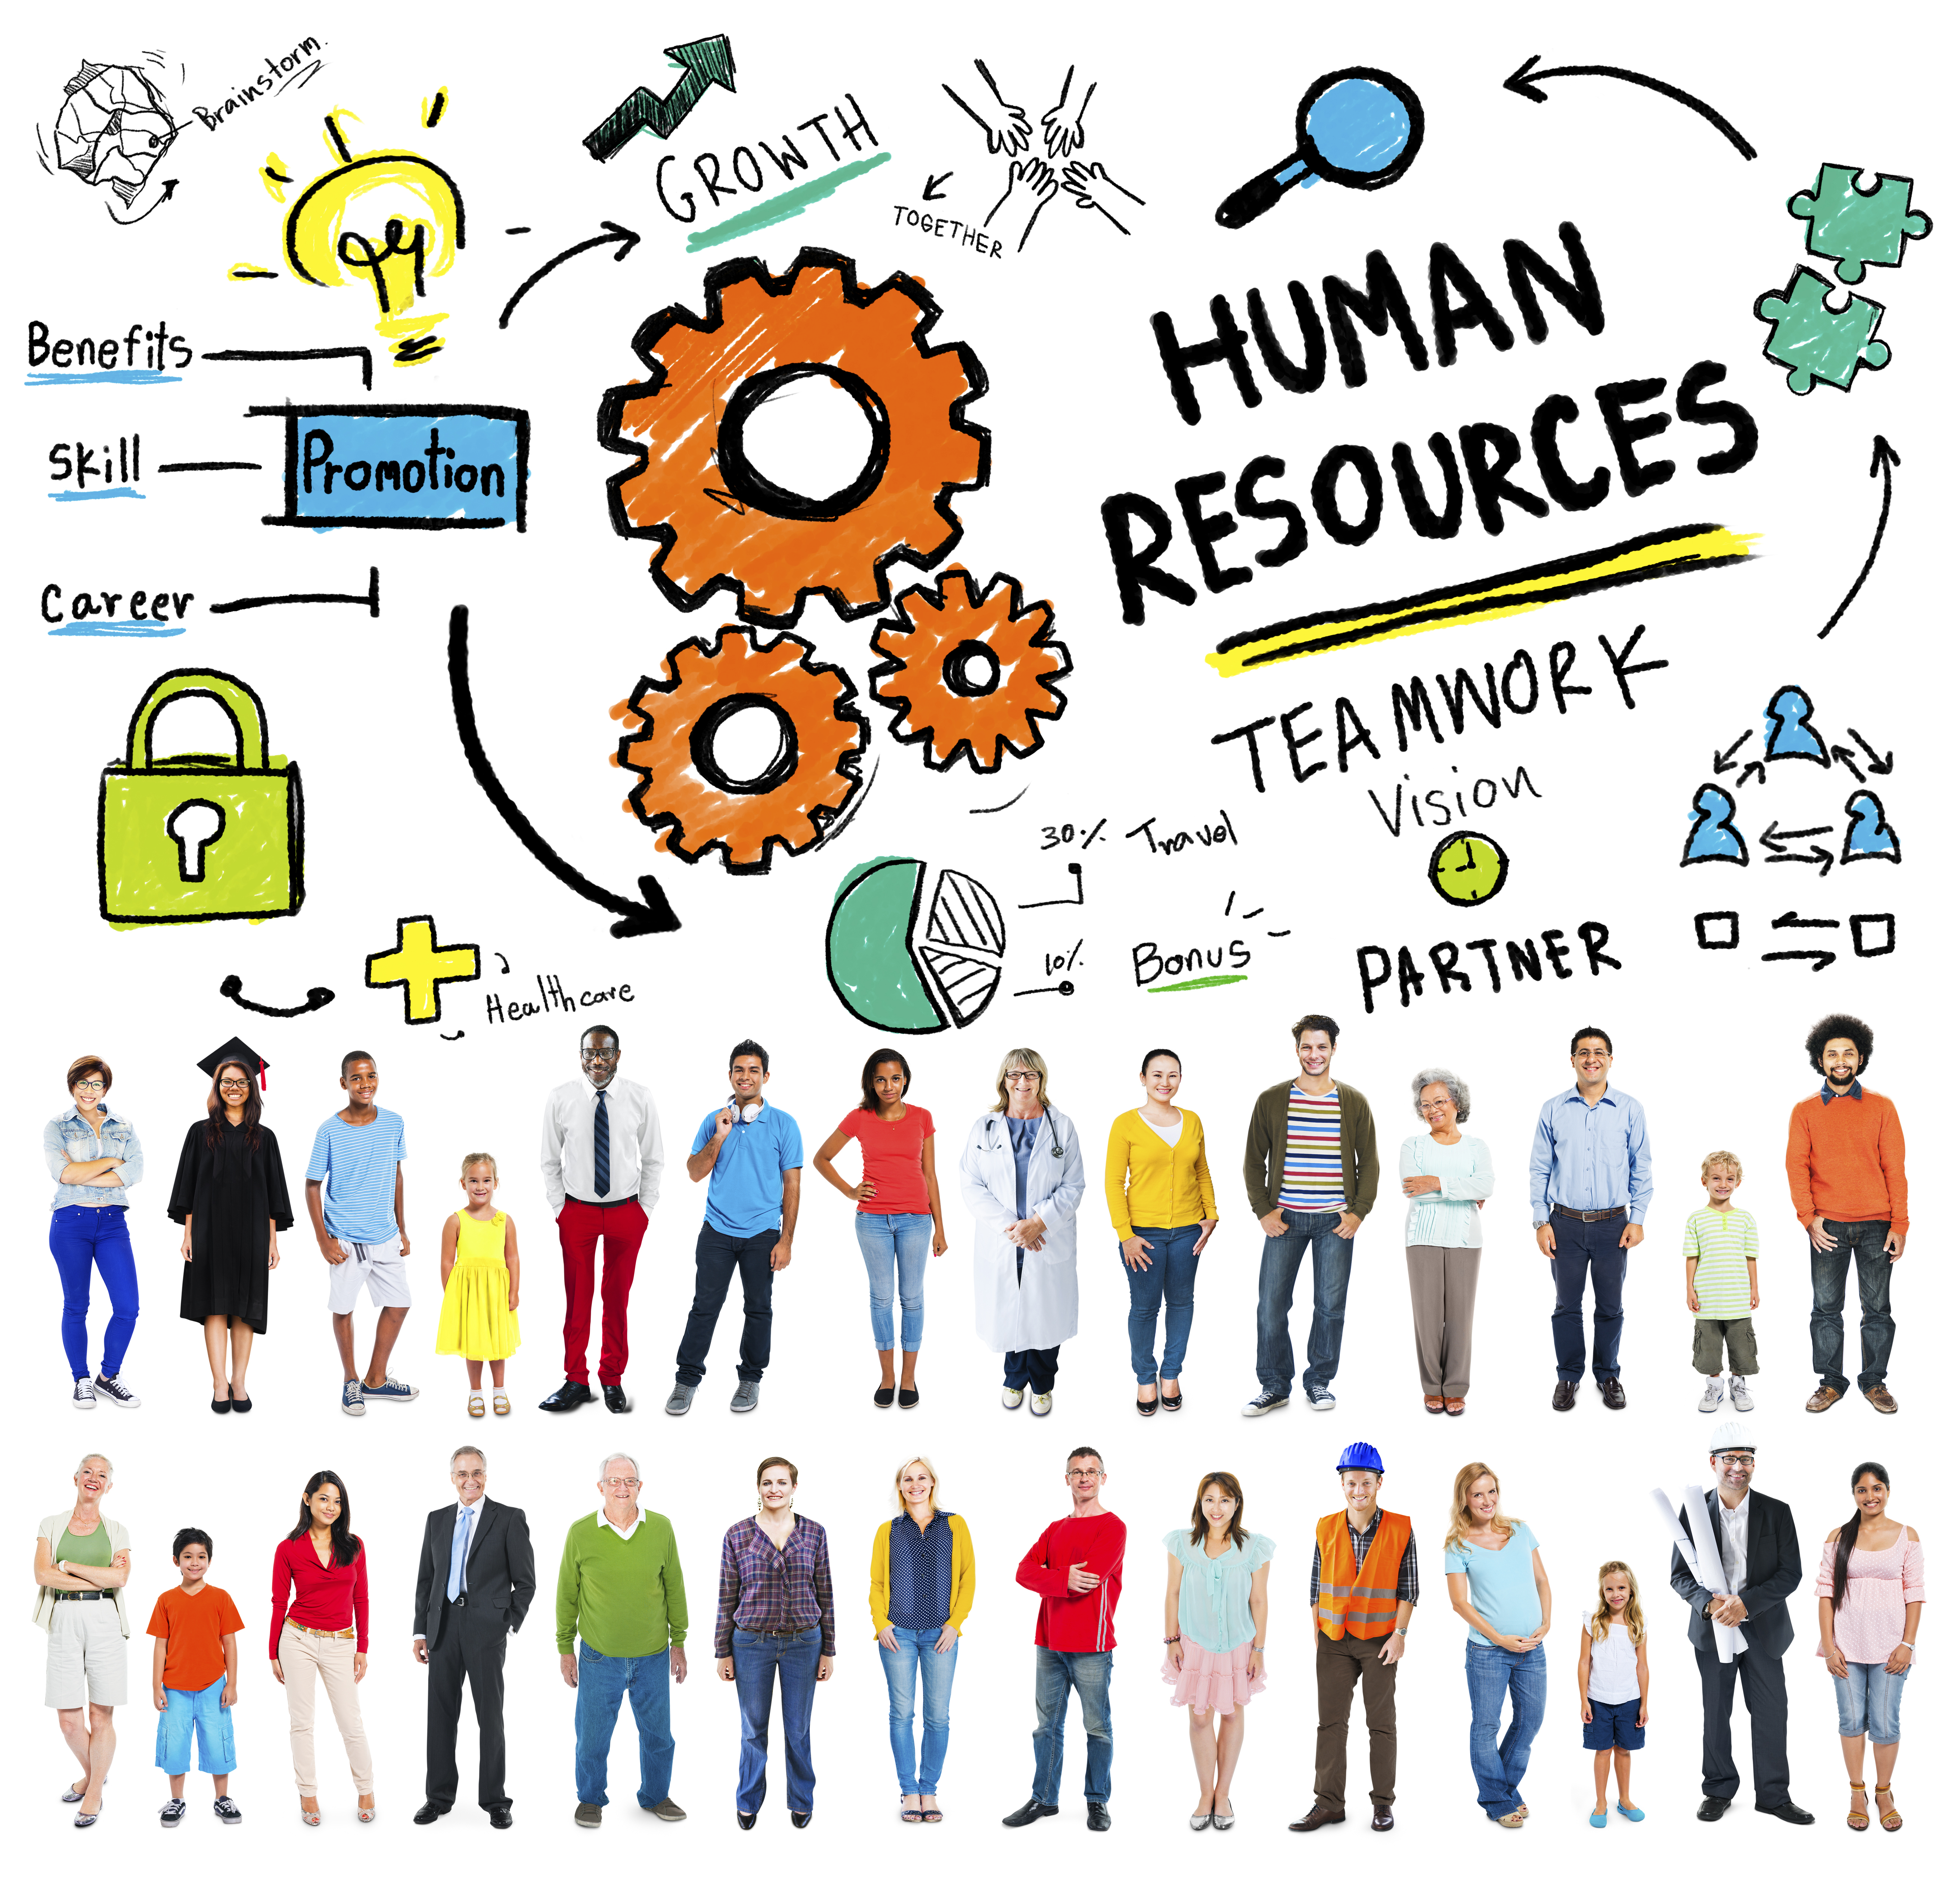 How to Architect a New Vision for Strategic HR Based on Engagement and Service Delivery